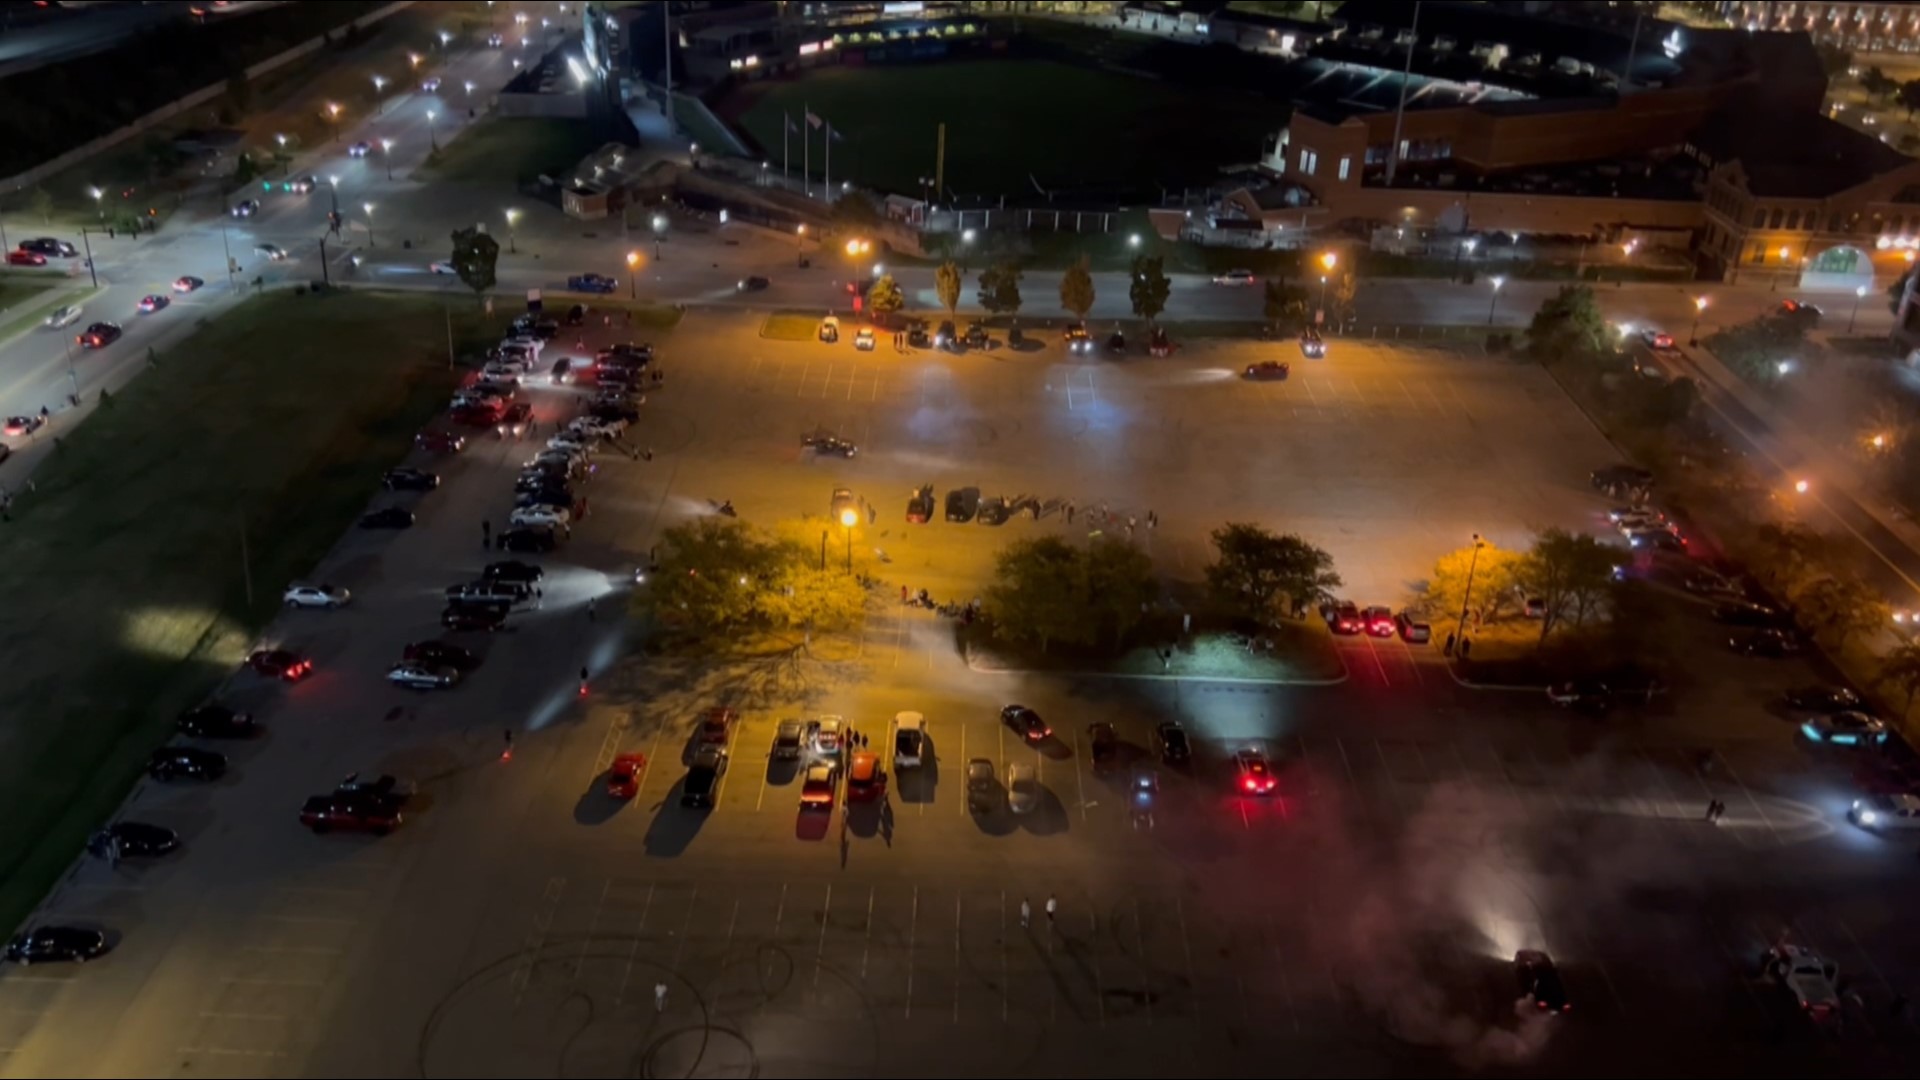 Neighbors captured this video in the parking lot west of Louisville Slugger Field around midnight on September 16 that had about 300 cars in street racing.